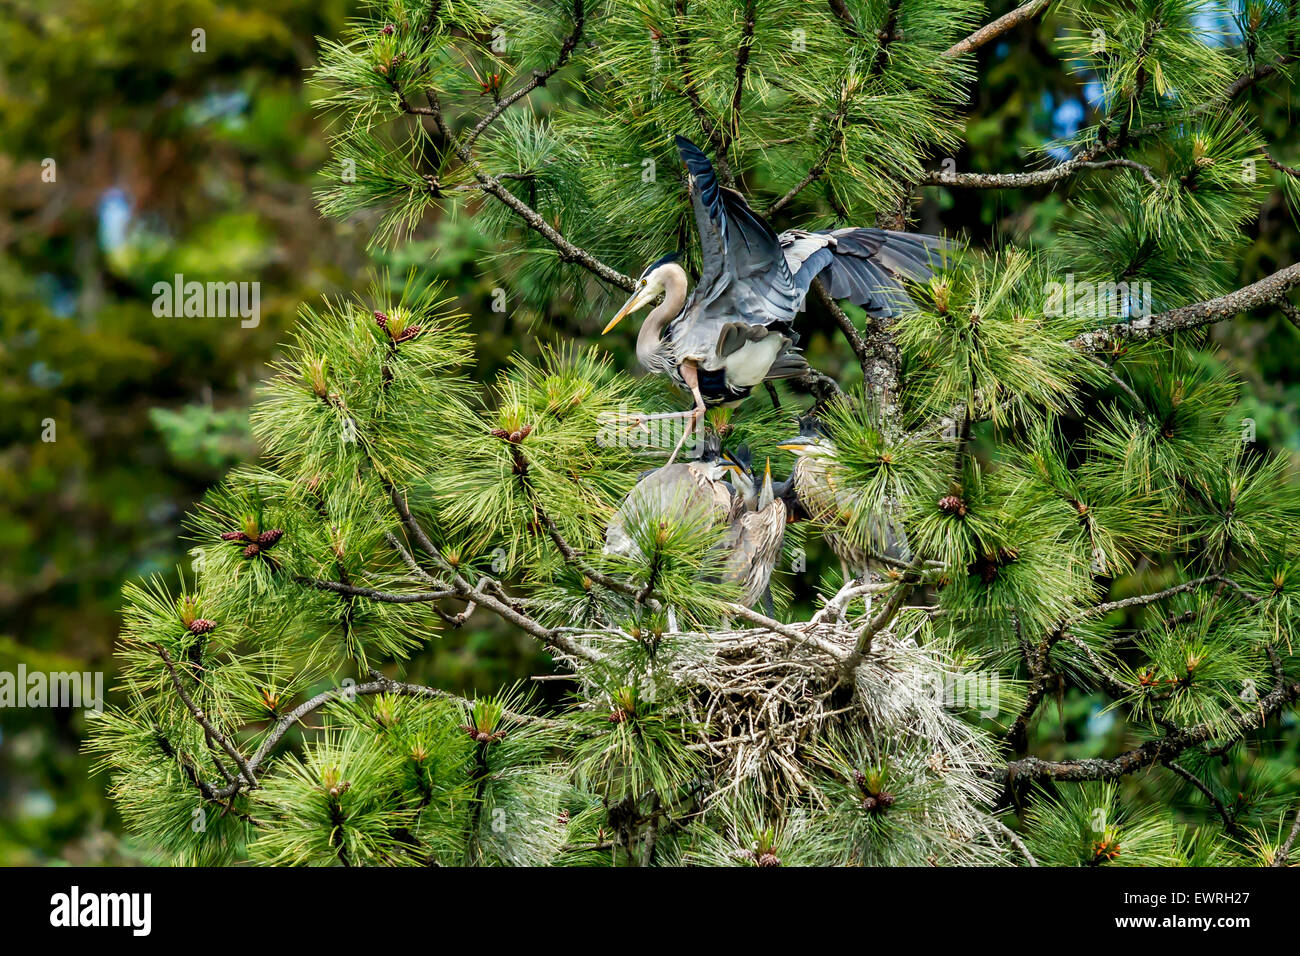 Heron flaps wings over nest. Stock Photo